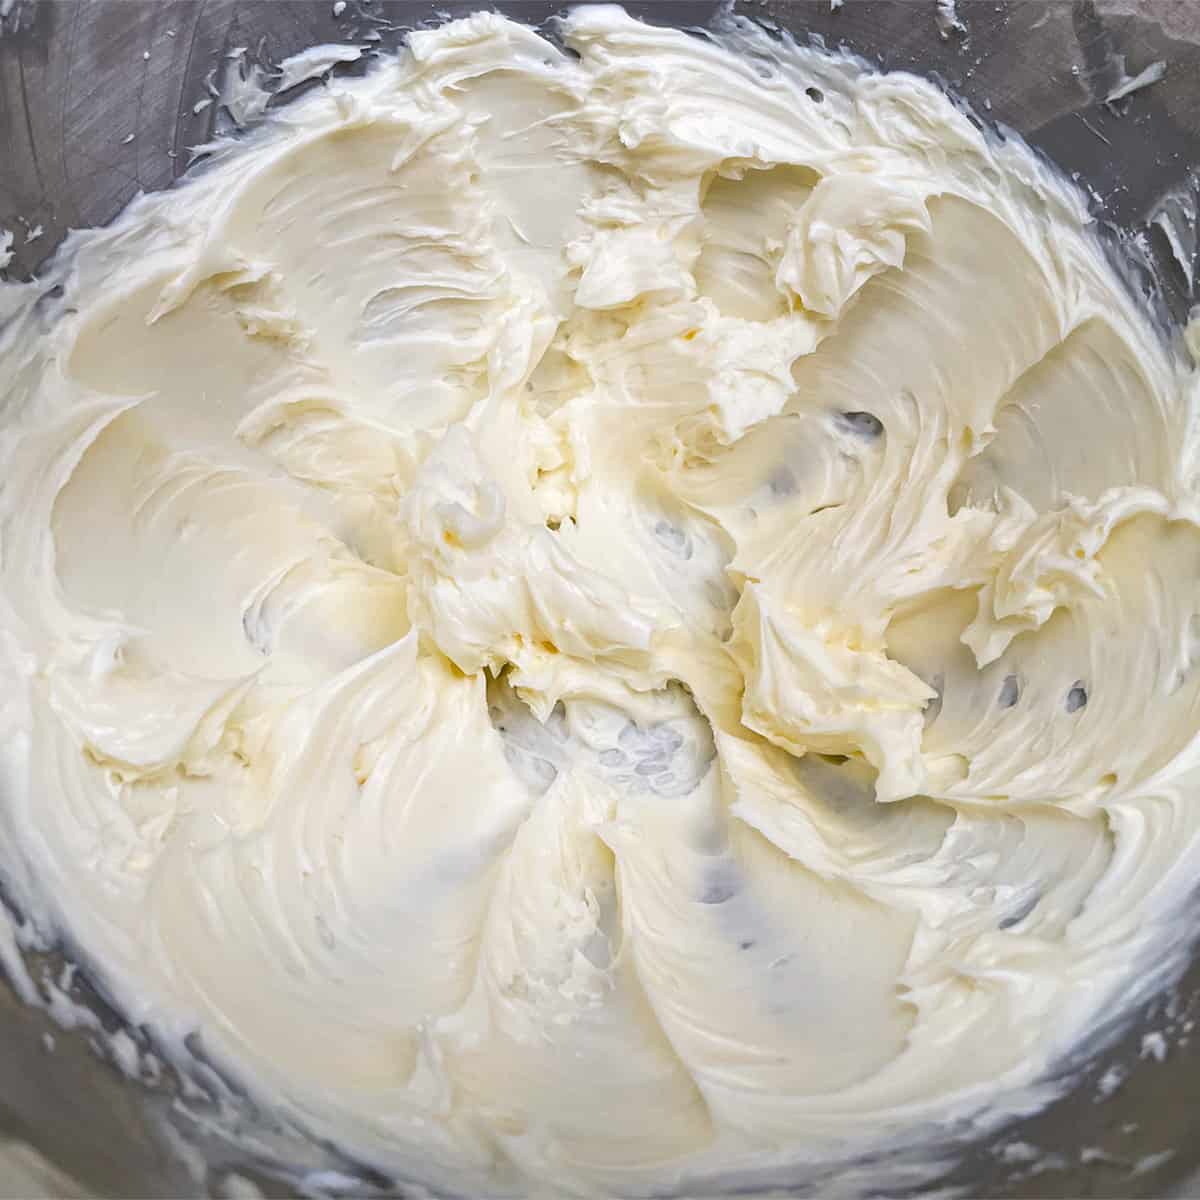 Creamy butter and sugar in a mixer bowl after a couple of minutes being mixed.